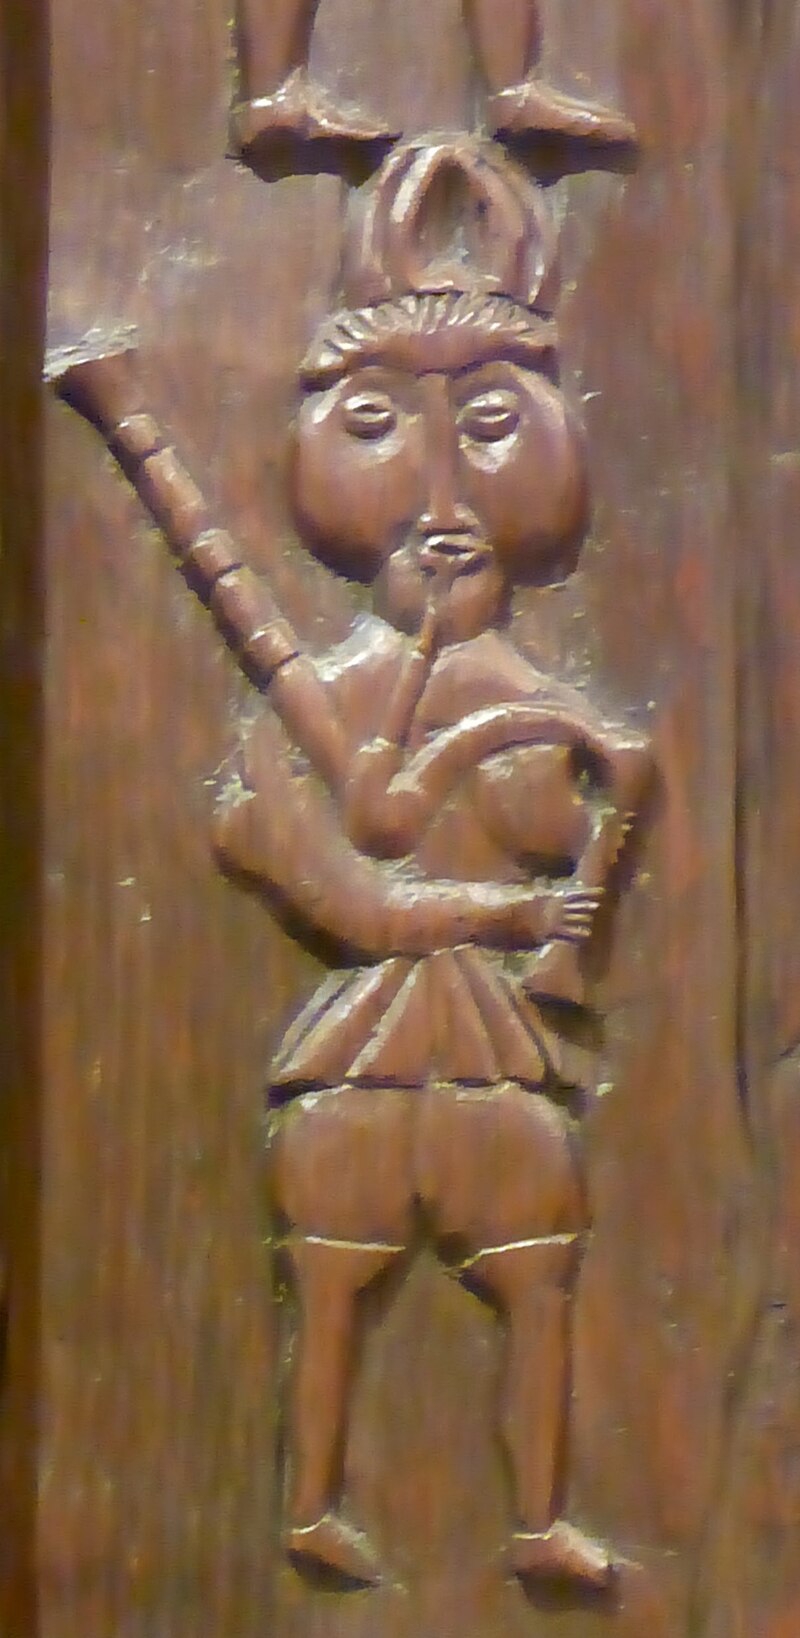 Bagpiper carved around 1600